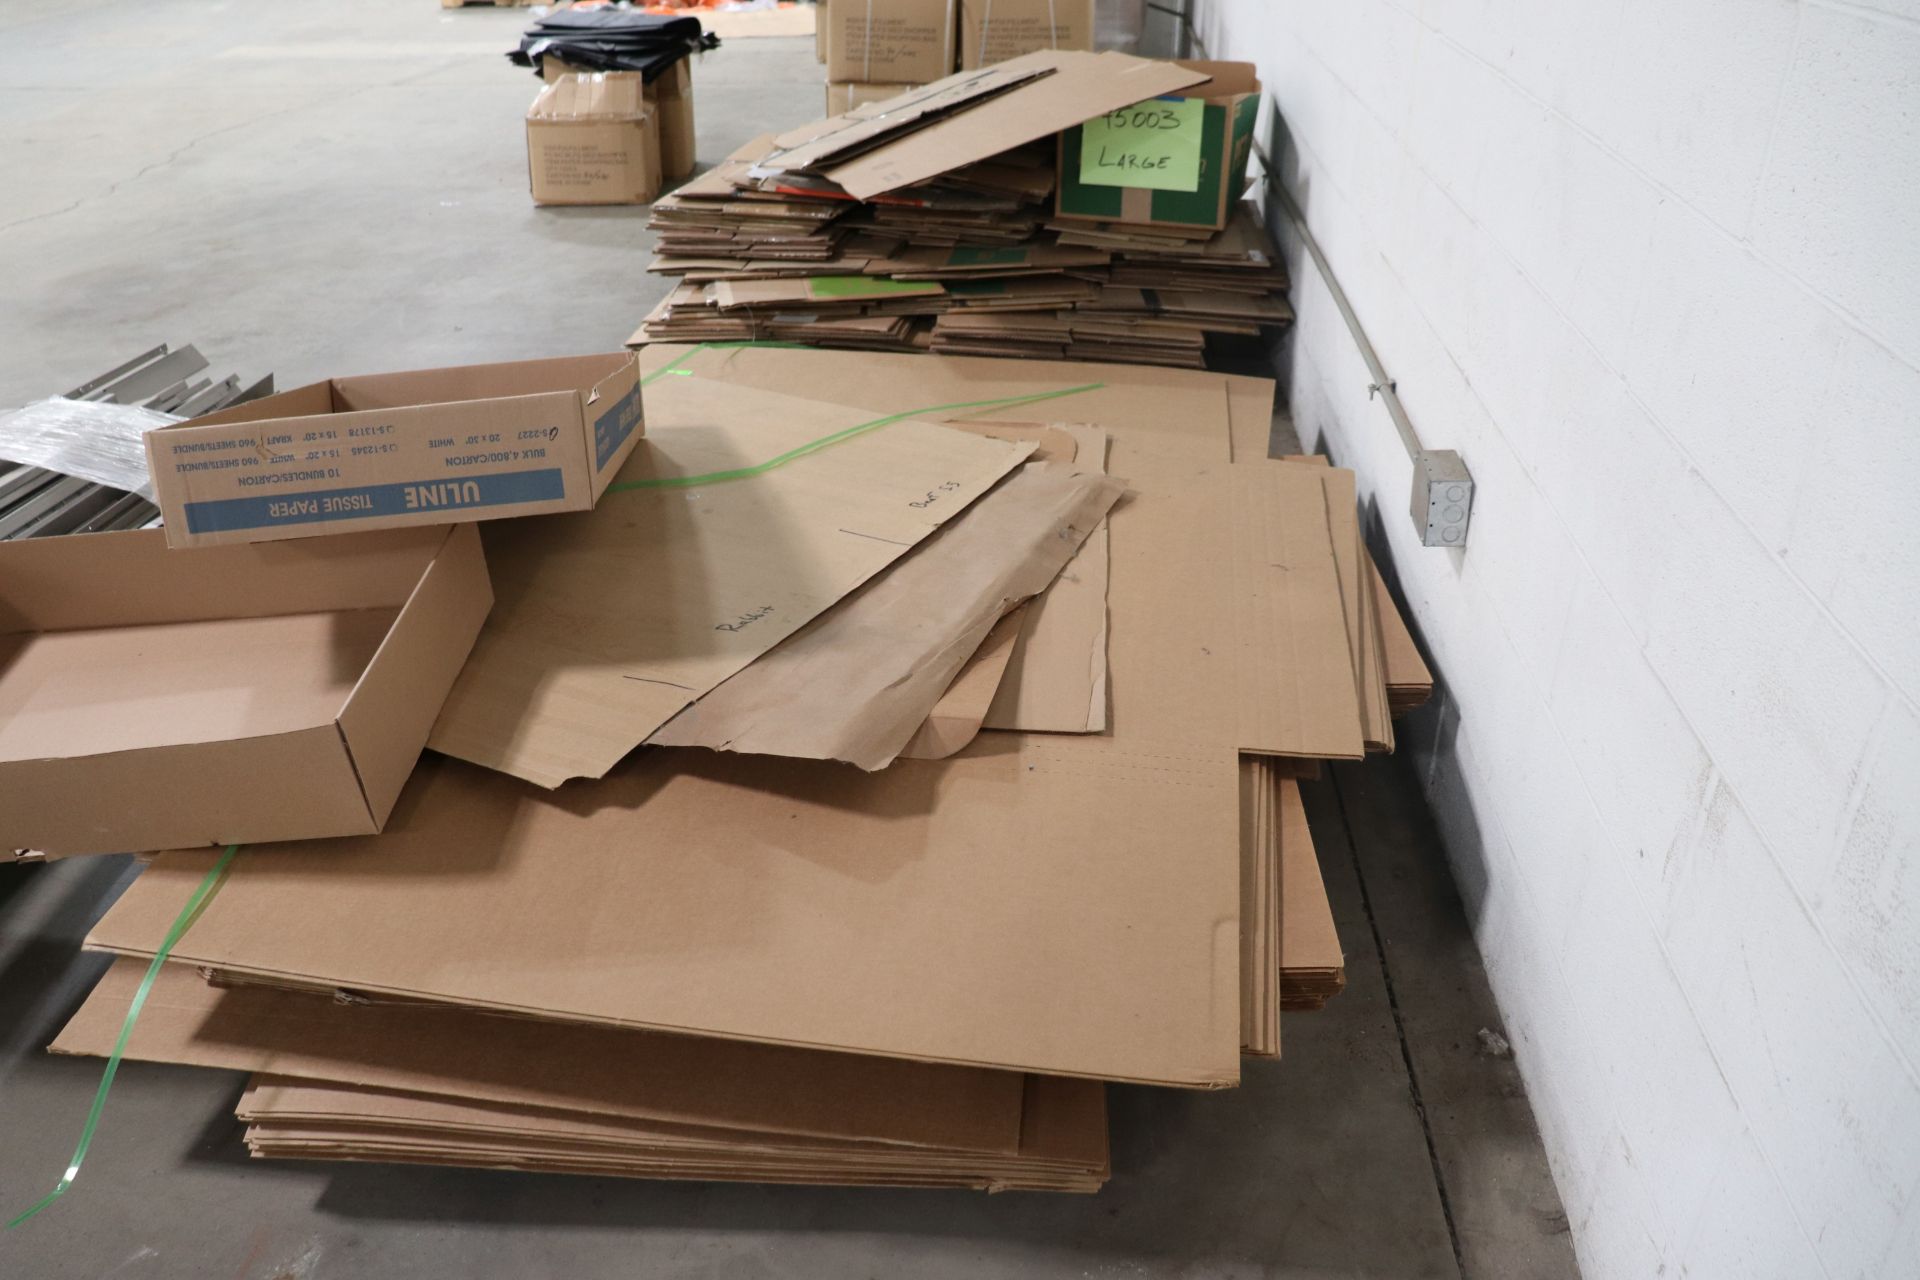 Partial pallet of cardboard boxes